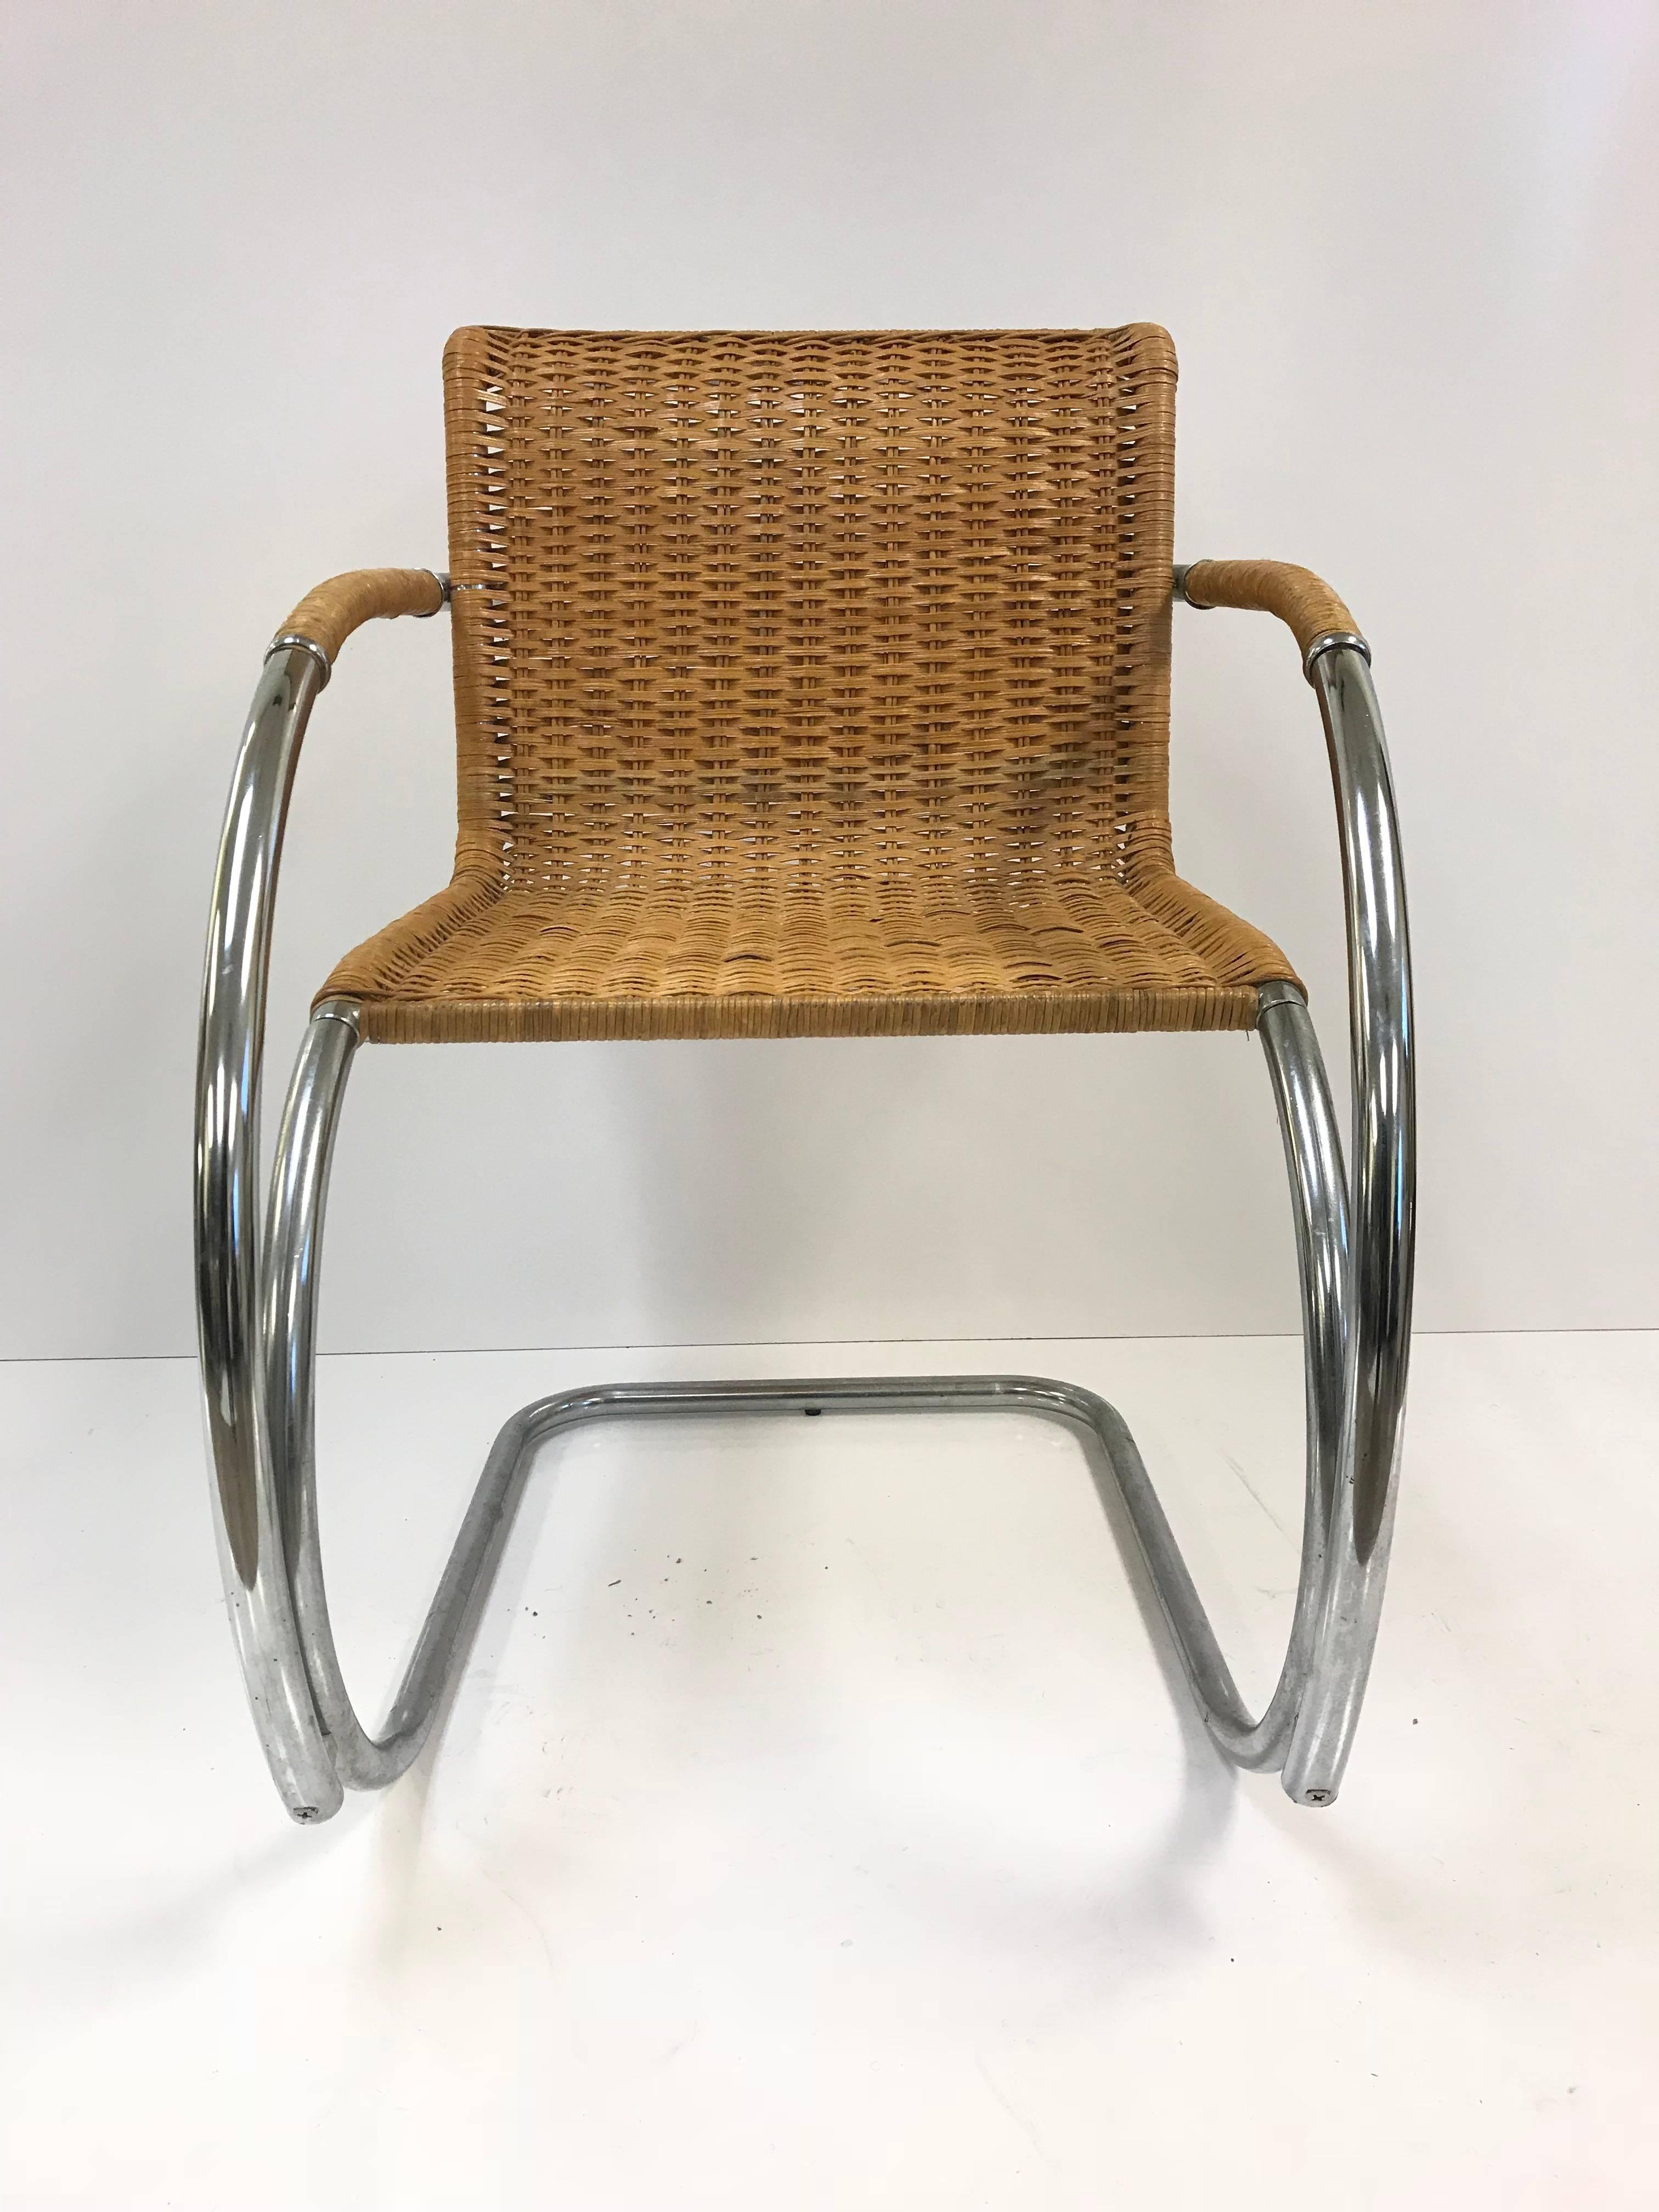 Set of four Ludwig Mies van der Rohe MR20 chairs.  Wicker chairs with a chromed steel frame.  Nice complement to a mid century modern or Bauhaus interior.
